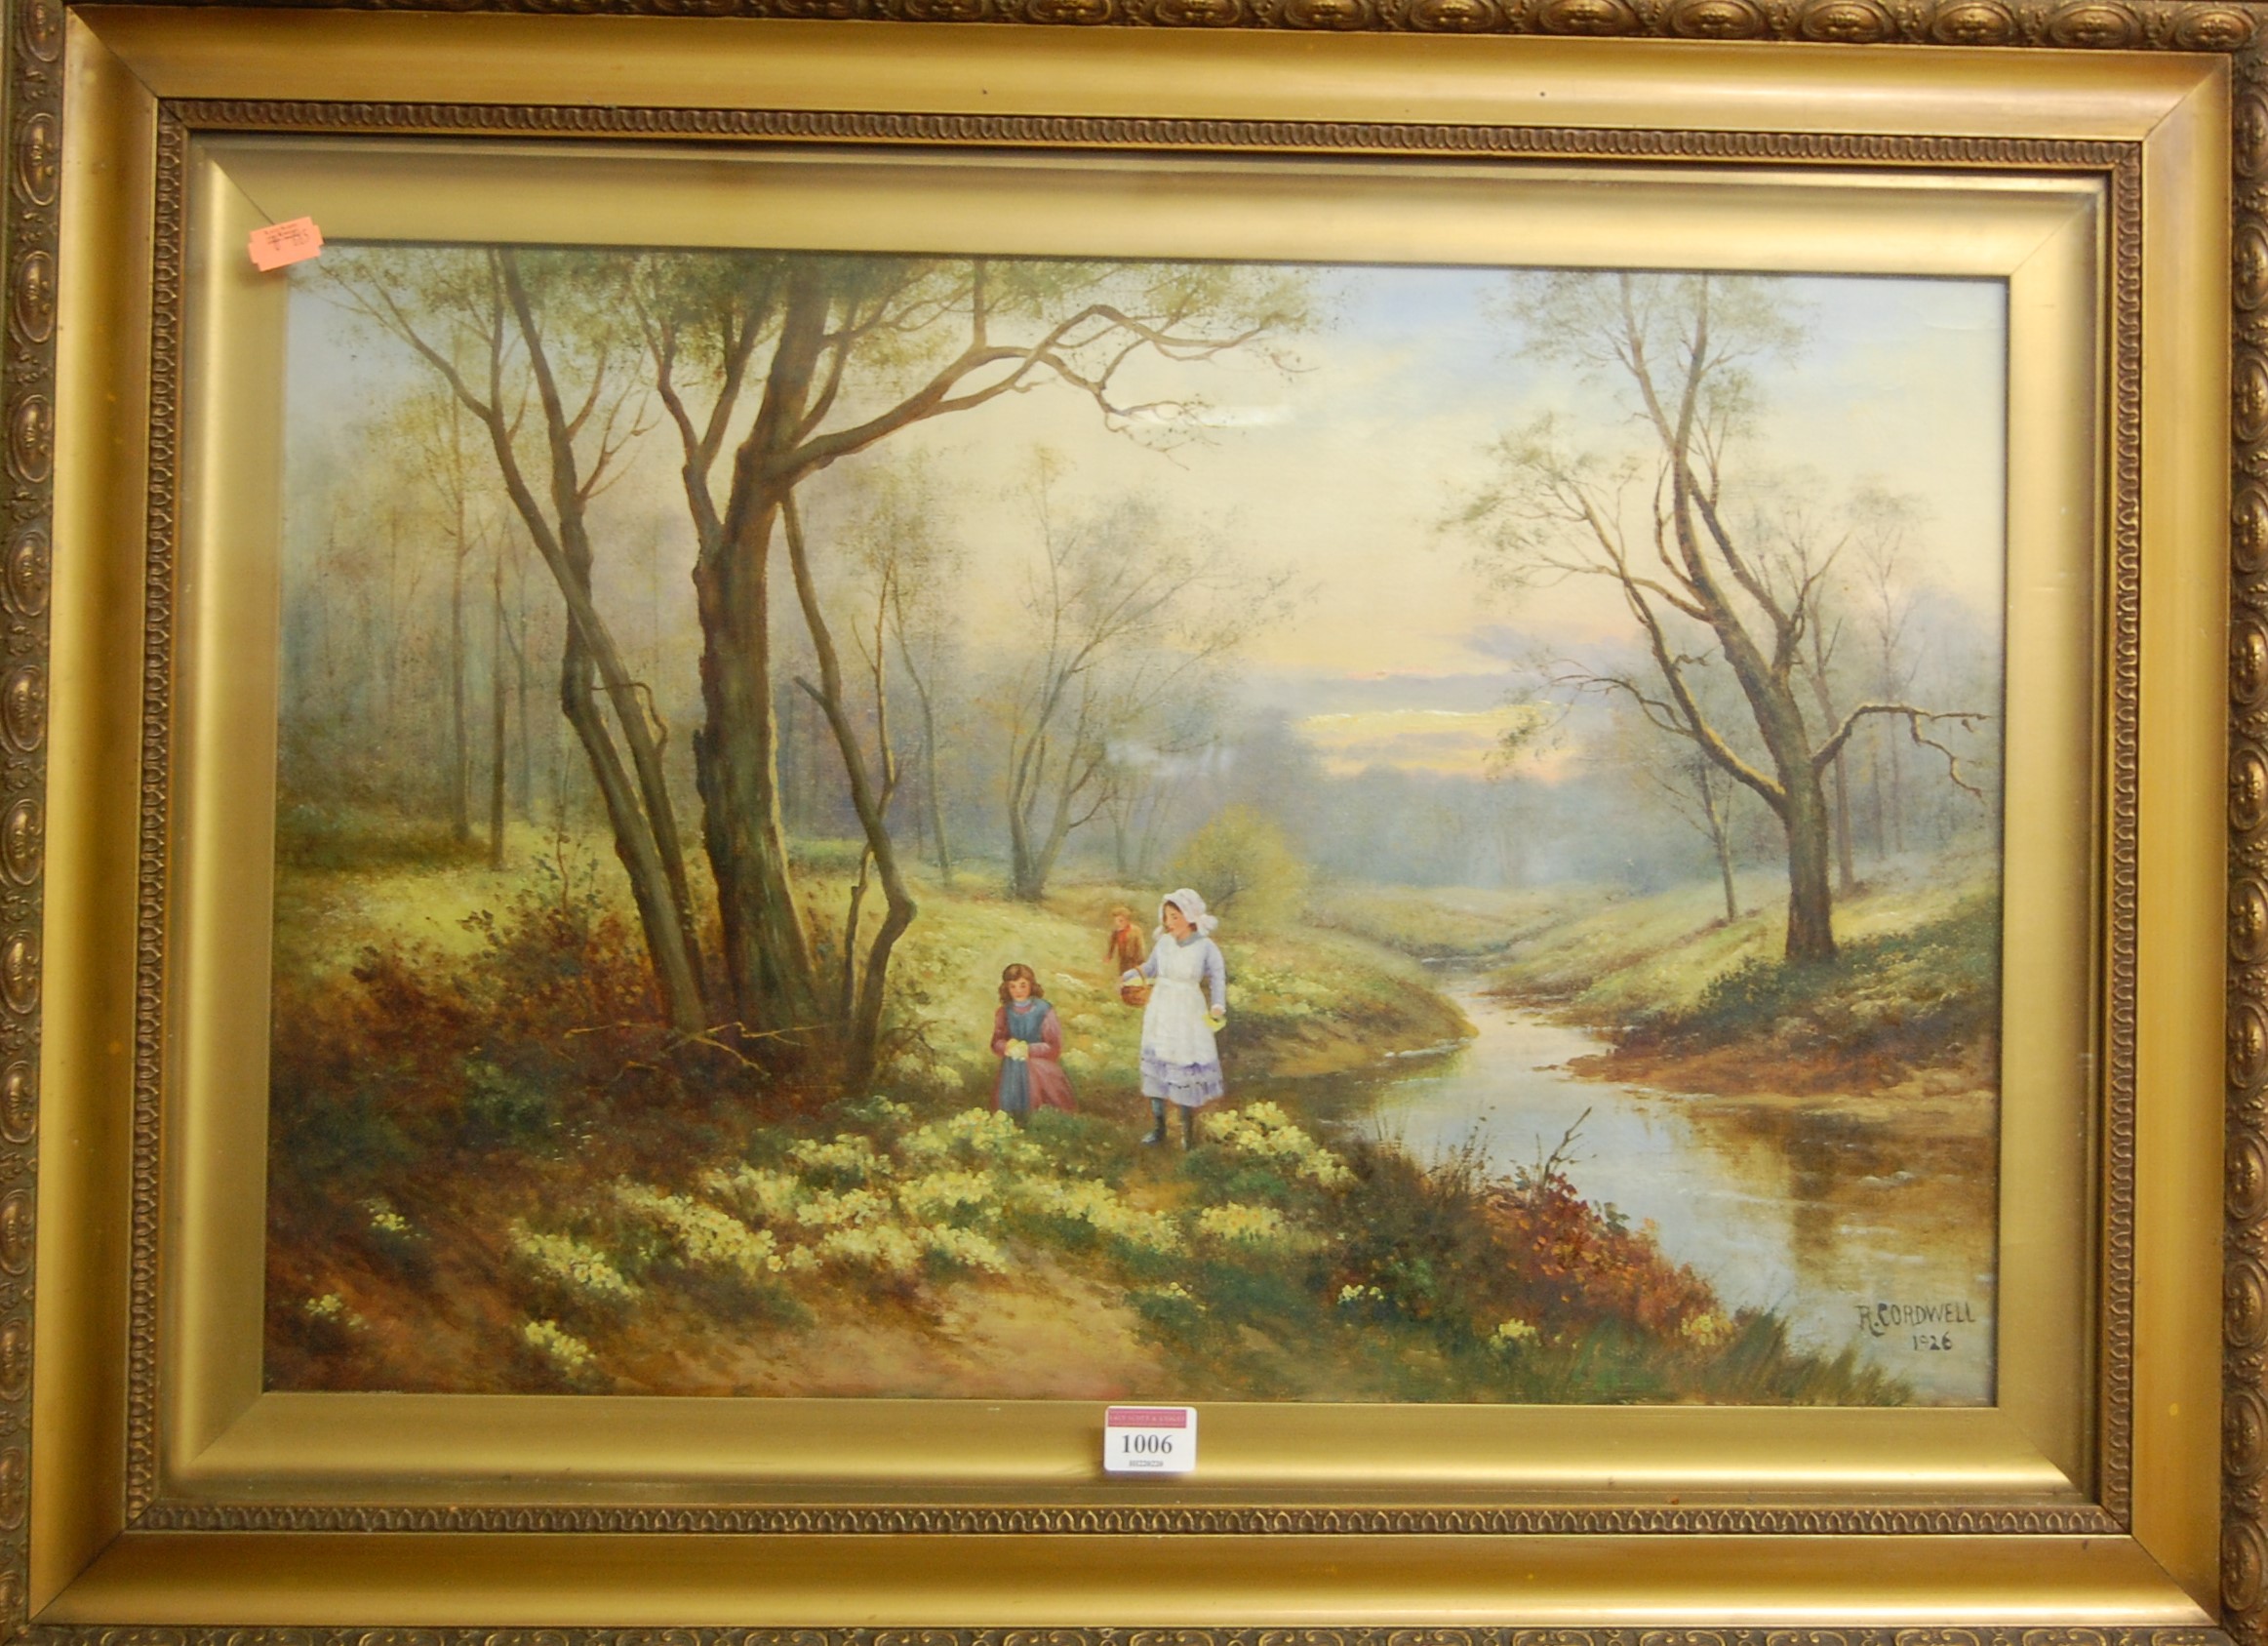 R. Caldwell - Flower-pickers on the riverbank, oil on canvas, signed and dated lower right, 40 x